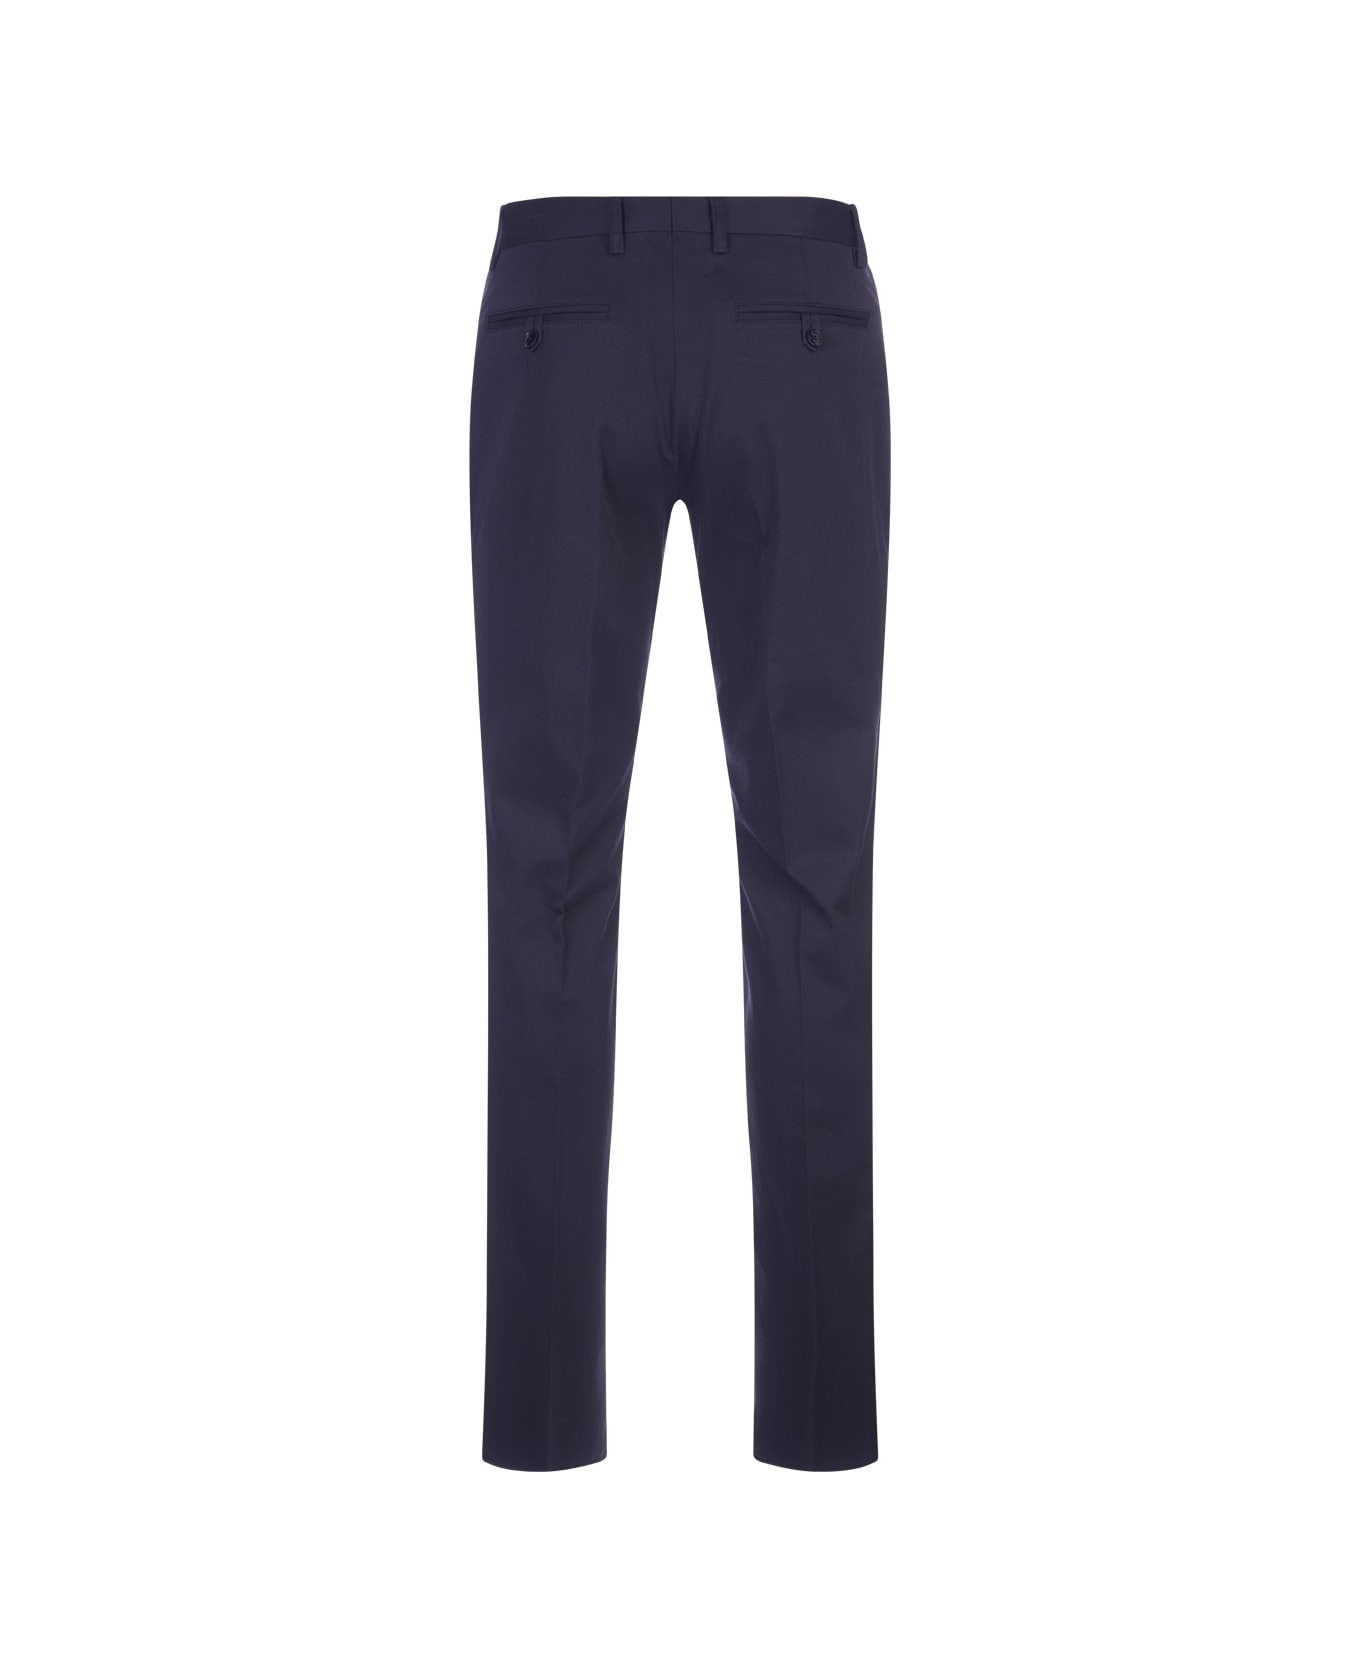 Etro Classic Trousers In Navy Blue Stretch Cotton